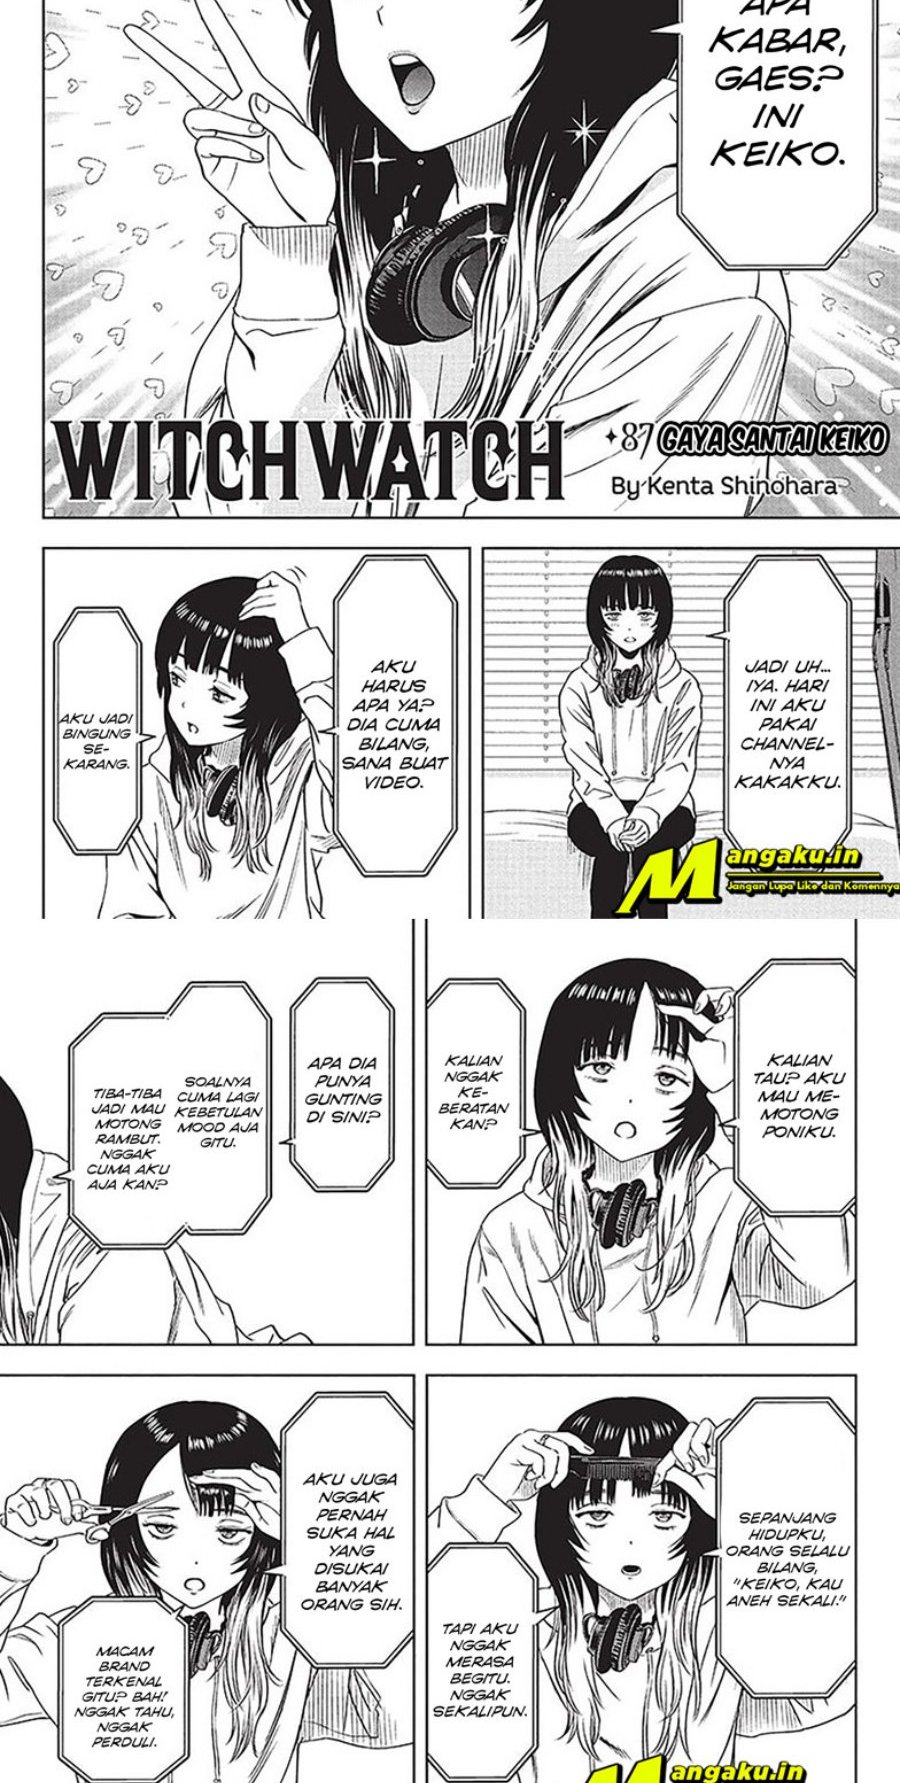 Witch Watch Chapter 87 - 97